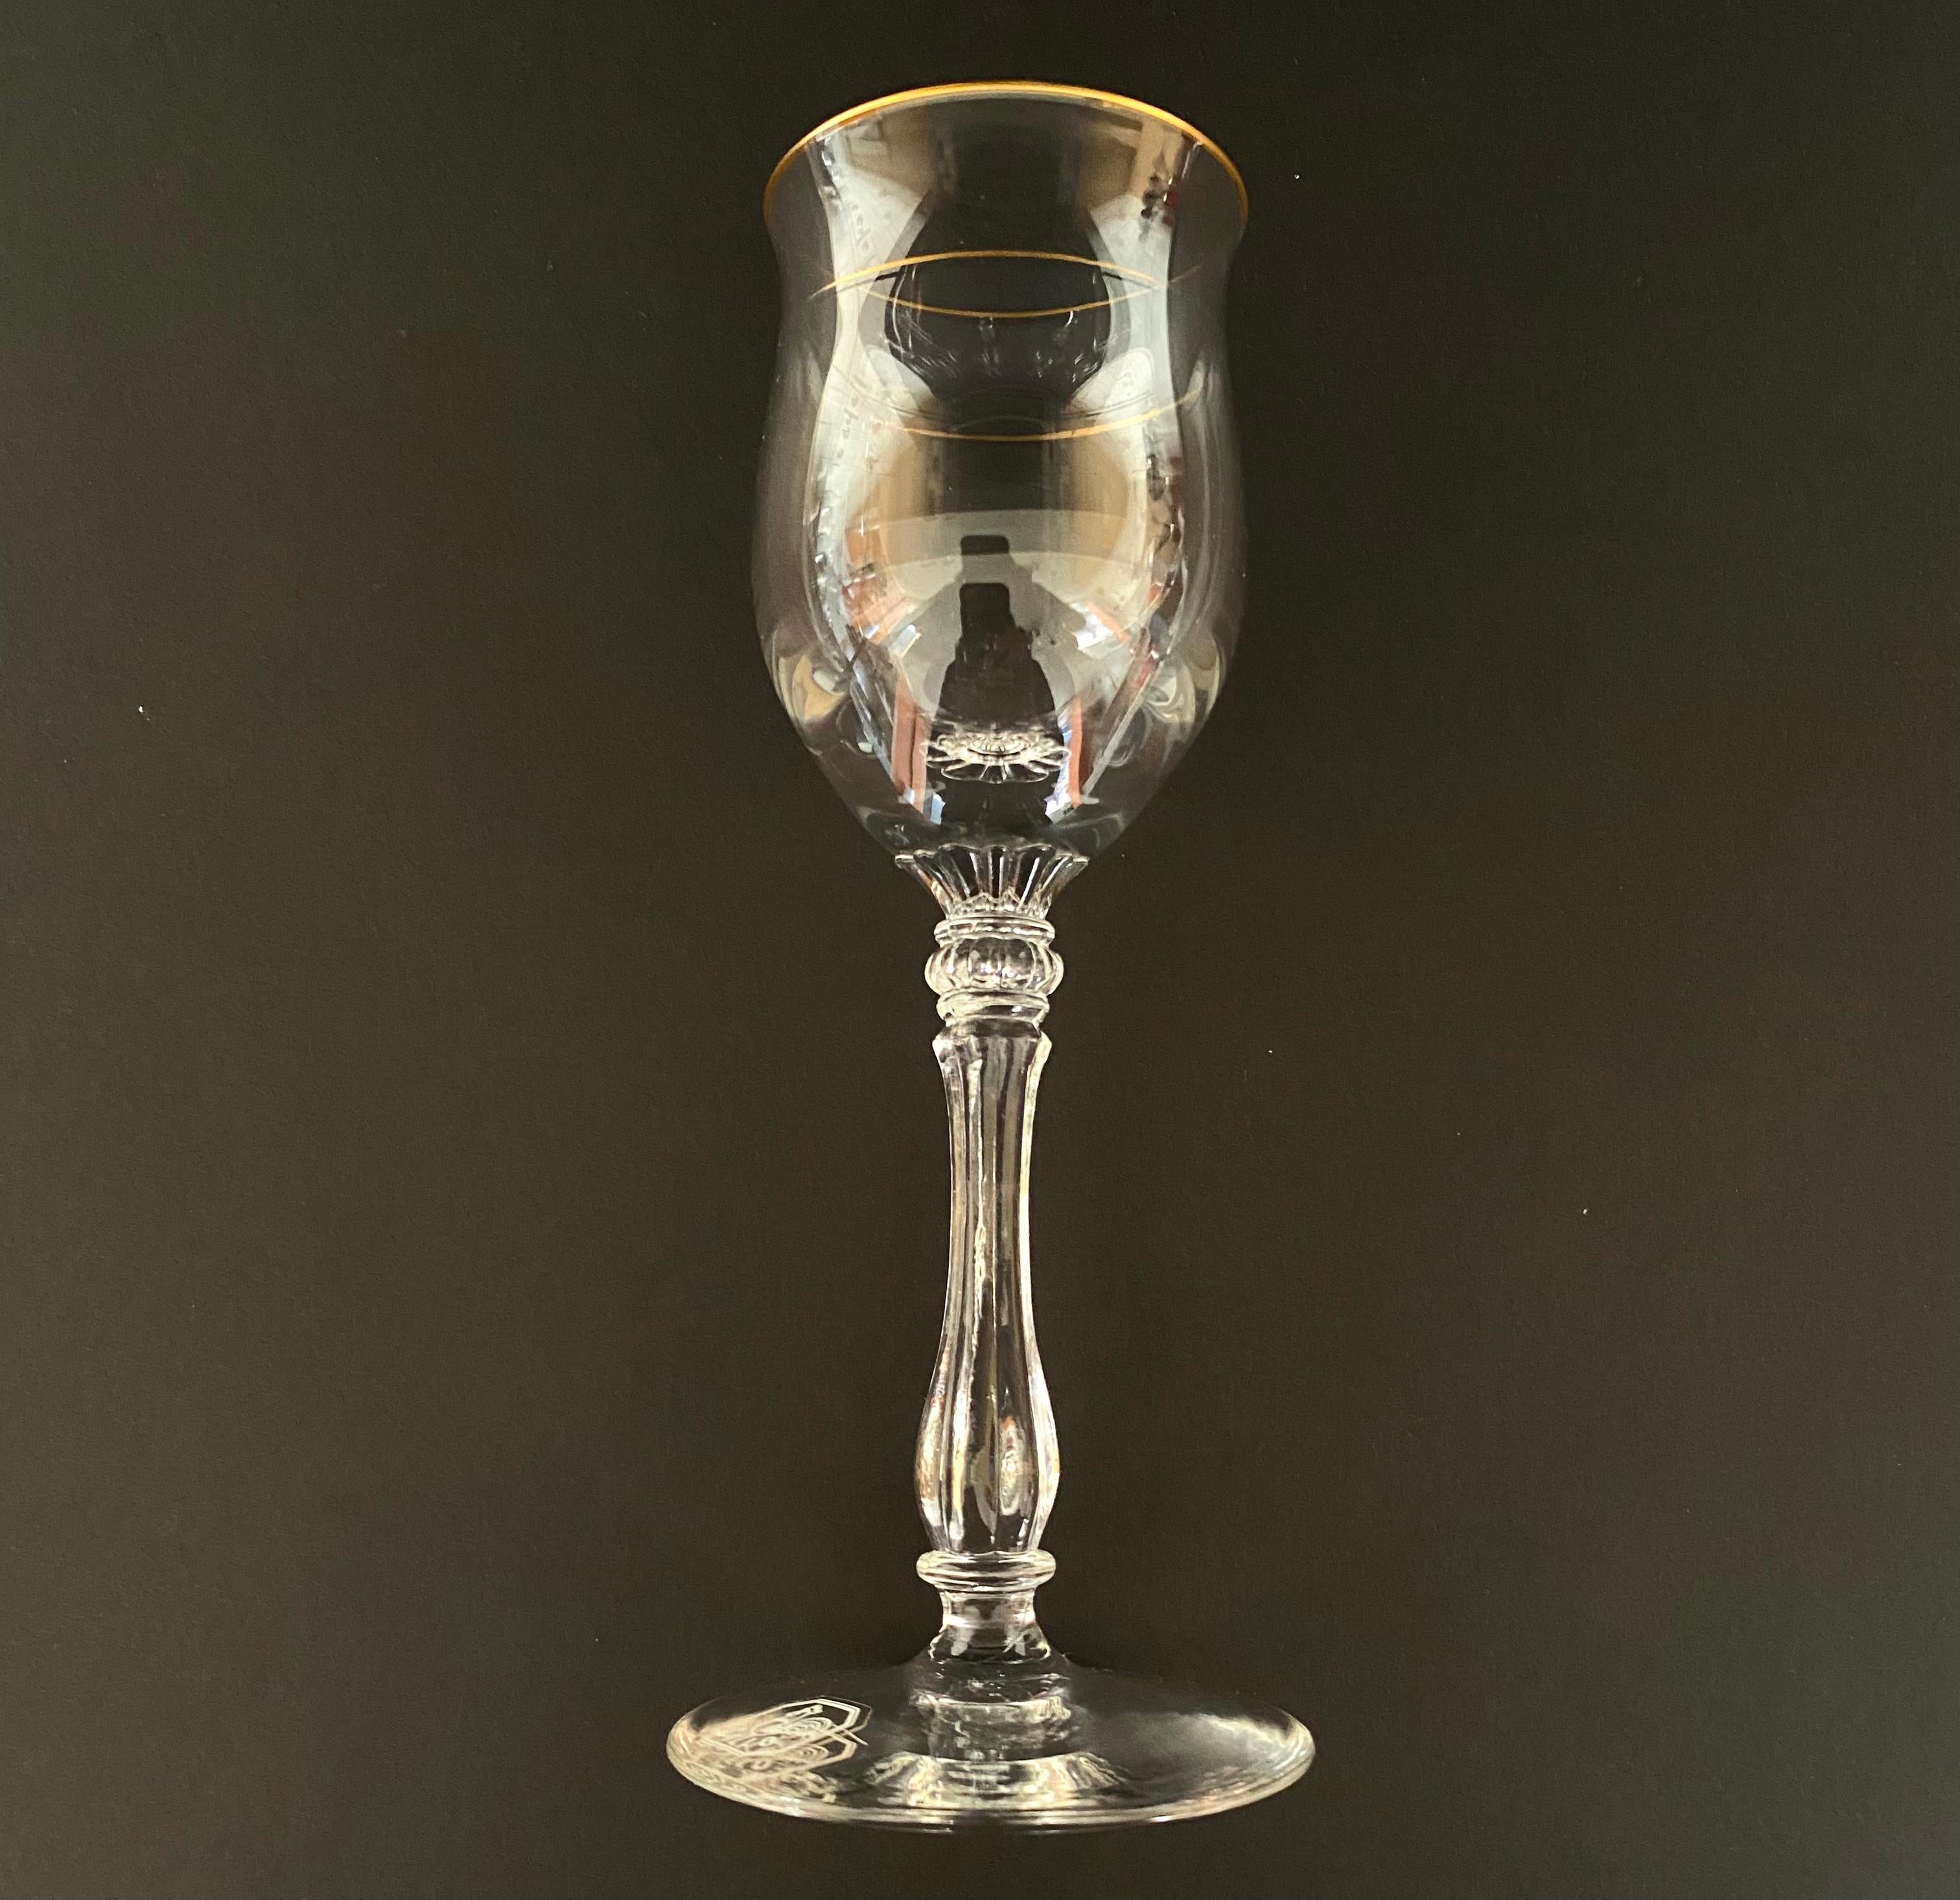 Gorgeous Crystal Glasses set by German manufactory Gallo. Around 1970s.

Products are equipped with high legs and are designed to serve liquor, cognac or other liquids.

The glasses are hand-cut and munge blown. Elegant and precise work of art.